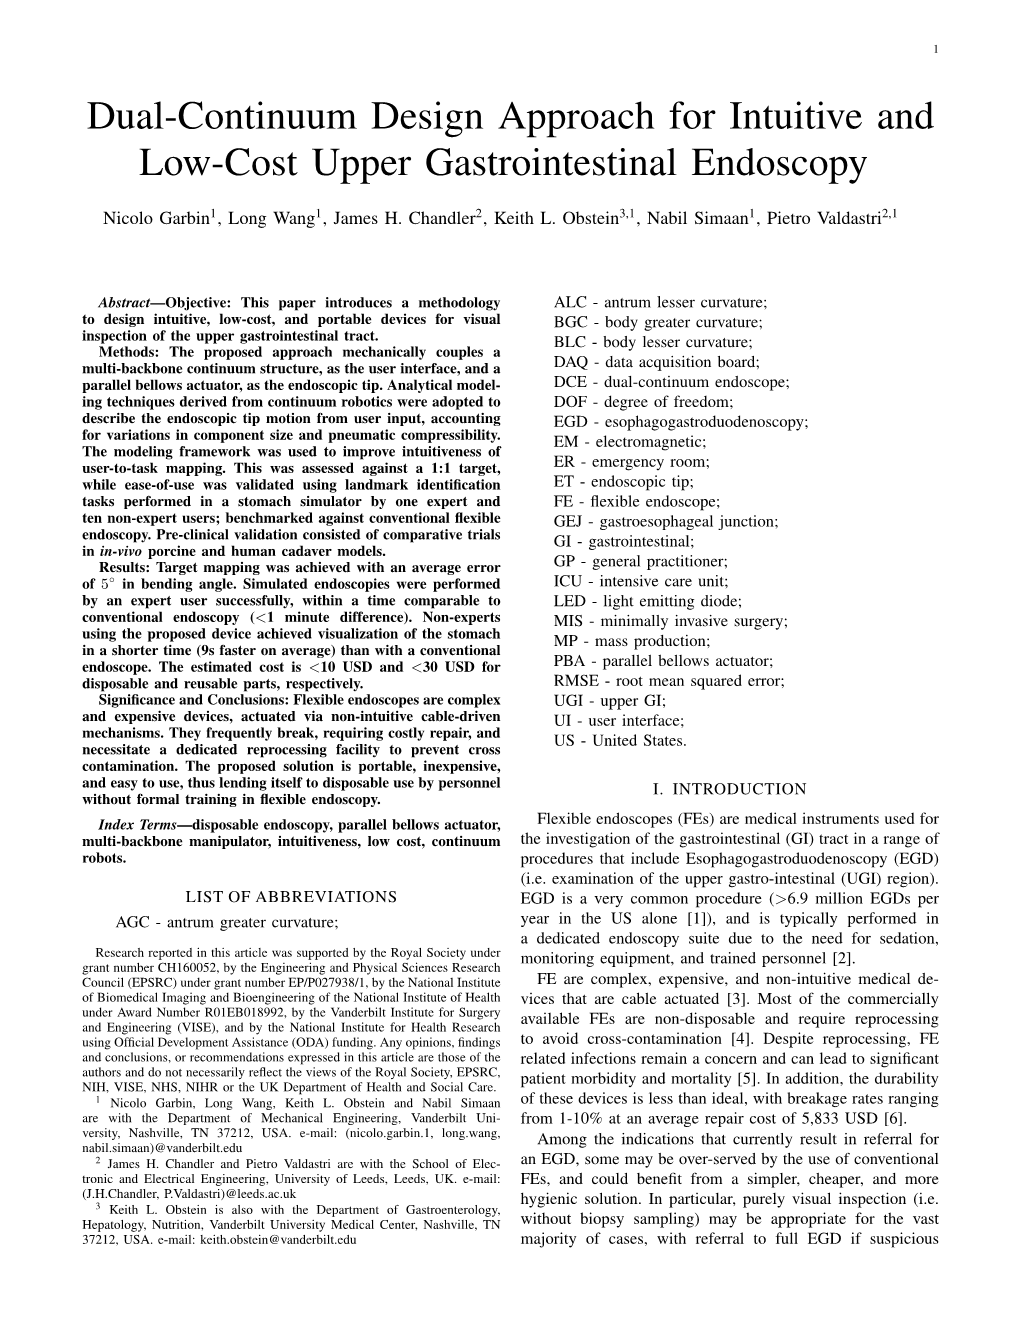 Dual-Continuum Design Approach for Intuitive and Low-Cost Upper Gastrointestinal Endoscopy